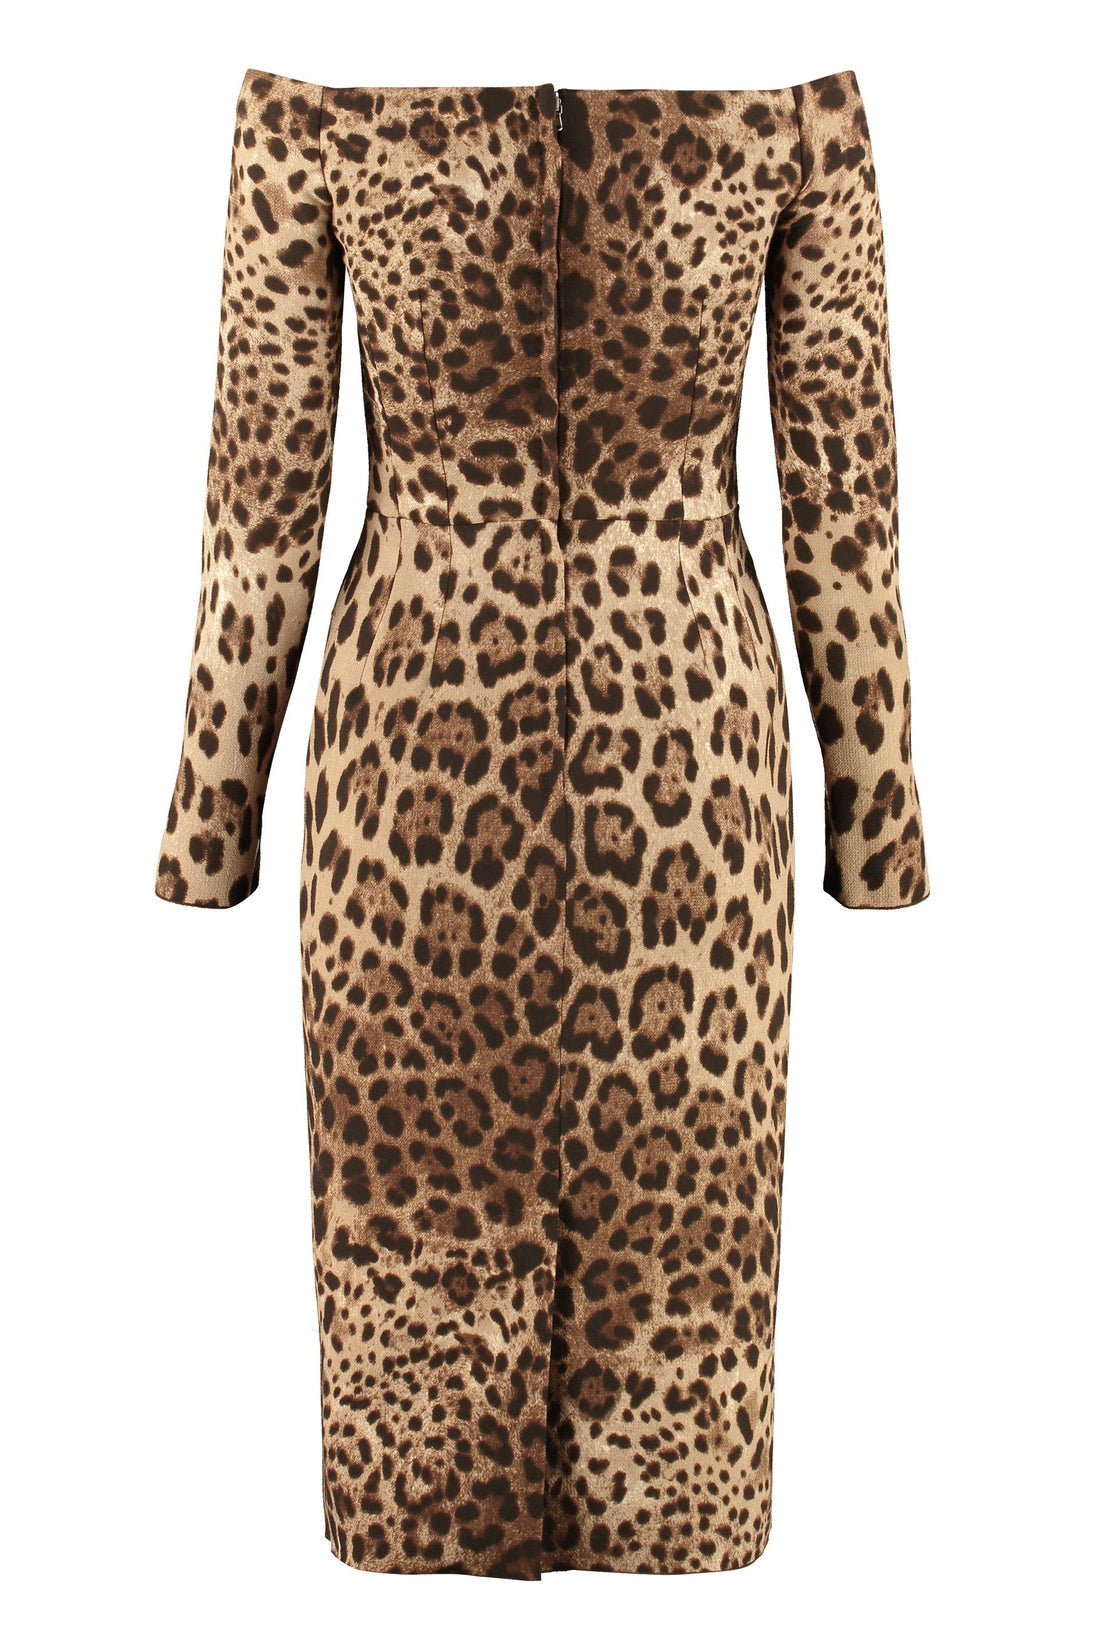 Dolce & Gabbana-OUTLET-SALE-Printed wool dress-ARCHIVIST